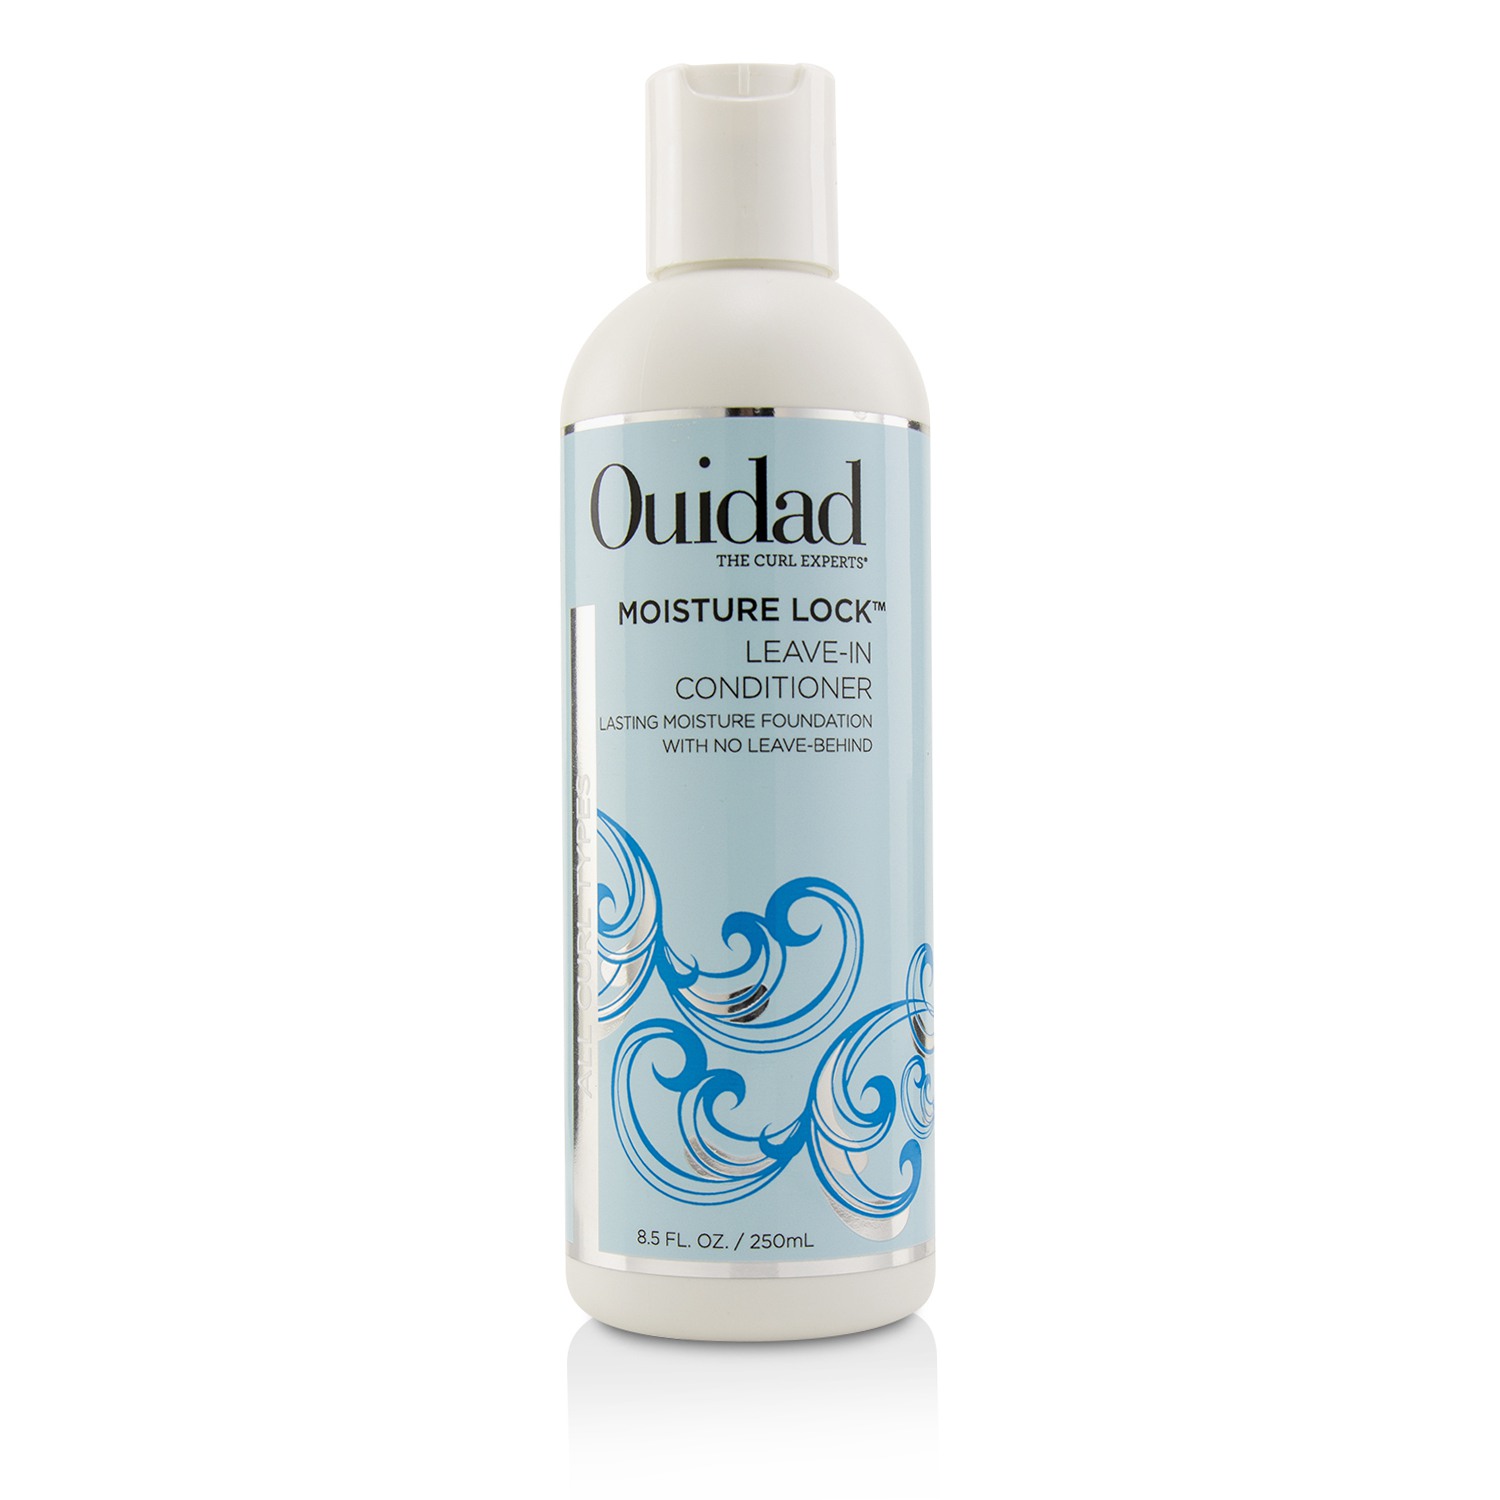 Moisture Lock Leave-In Conditioner (All Curl Types) Ouidad Image